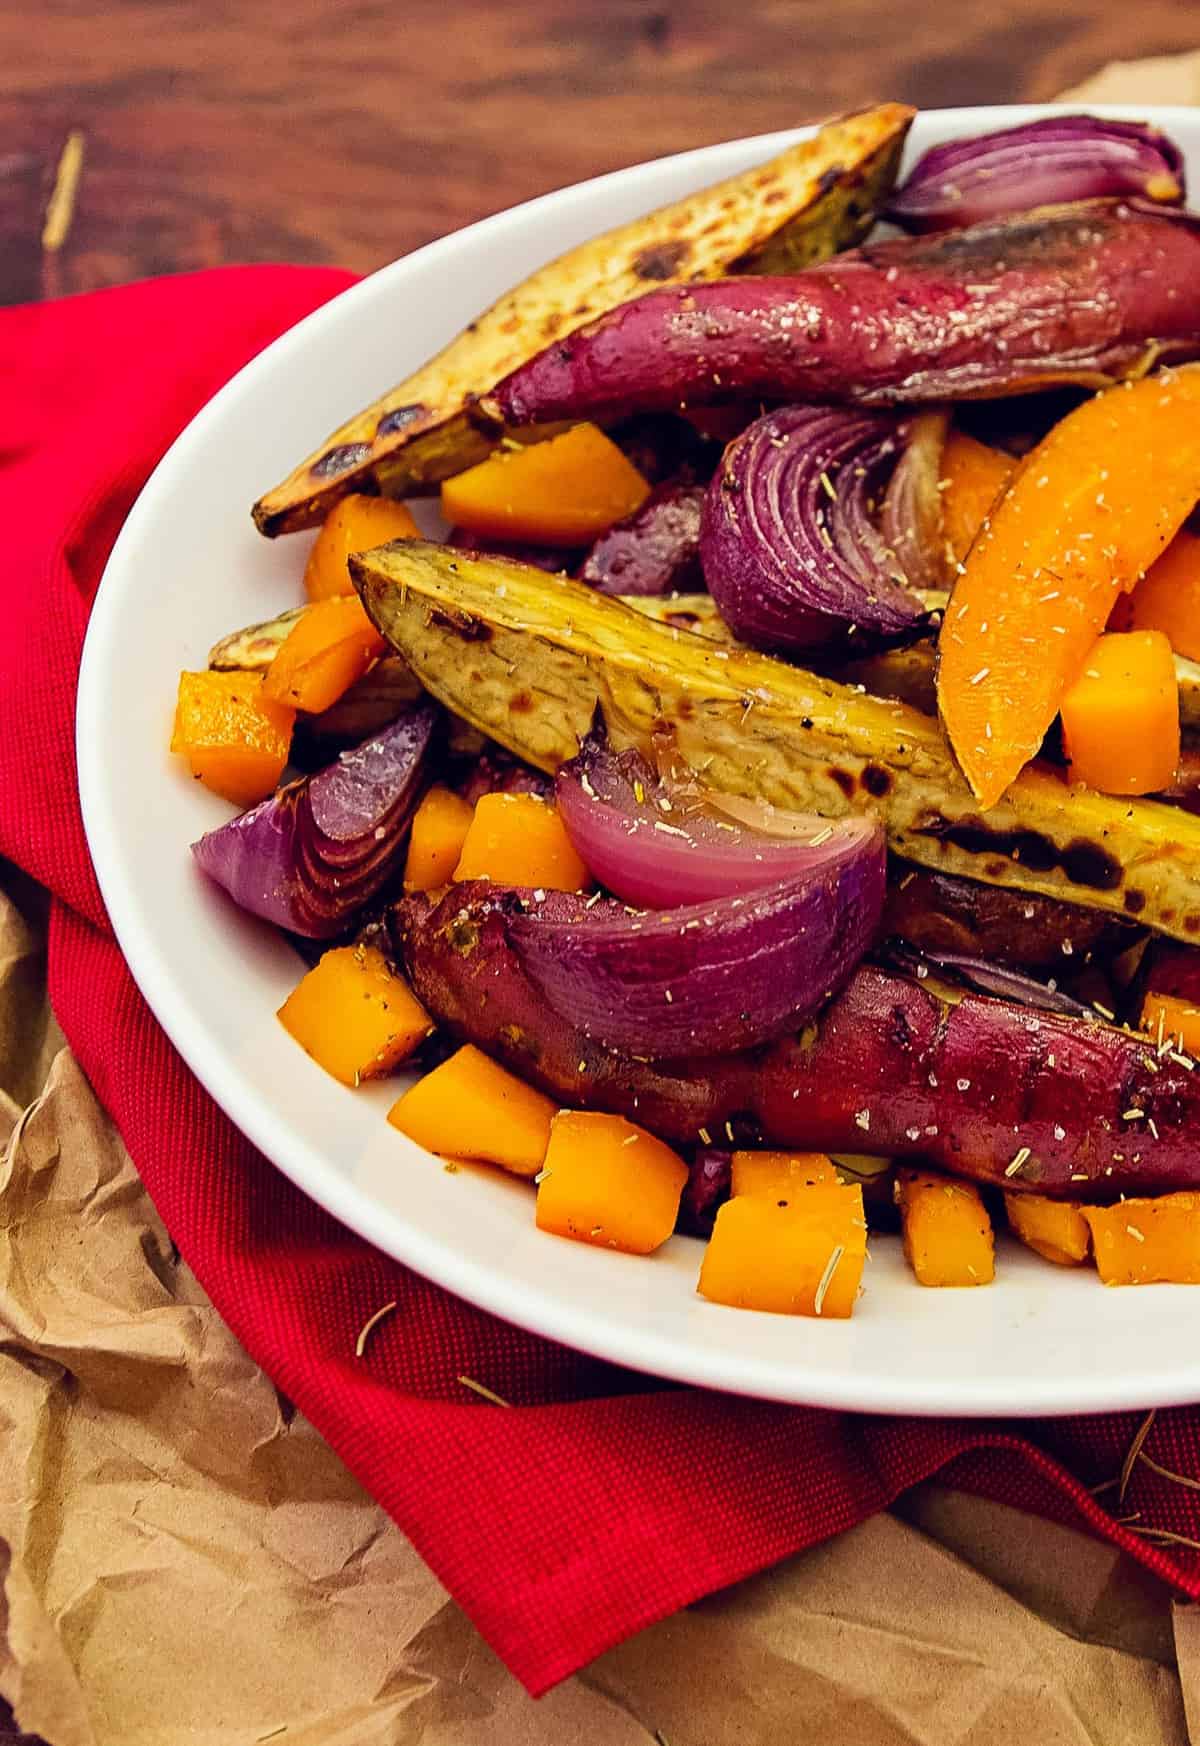 oven roasted rosemary root vegetables, oven roasted, root vegetables, veggies, rosemary, rosemary vegetables, whole food plant based, plant based, vegan, vegetarian, vegan side dish, vegetarian side dish, side, sides, side dish, oil free, no oil, refined sugar free, sweet potatoes, potatoes, Japanese sweet potatoes, butternut squash, squash, gluten free, quick, easy, fast: plant based meal ideas for the holidays - adoubledose.com